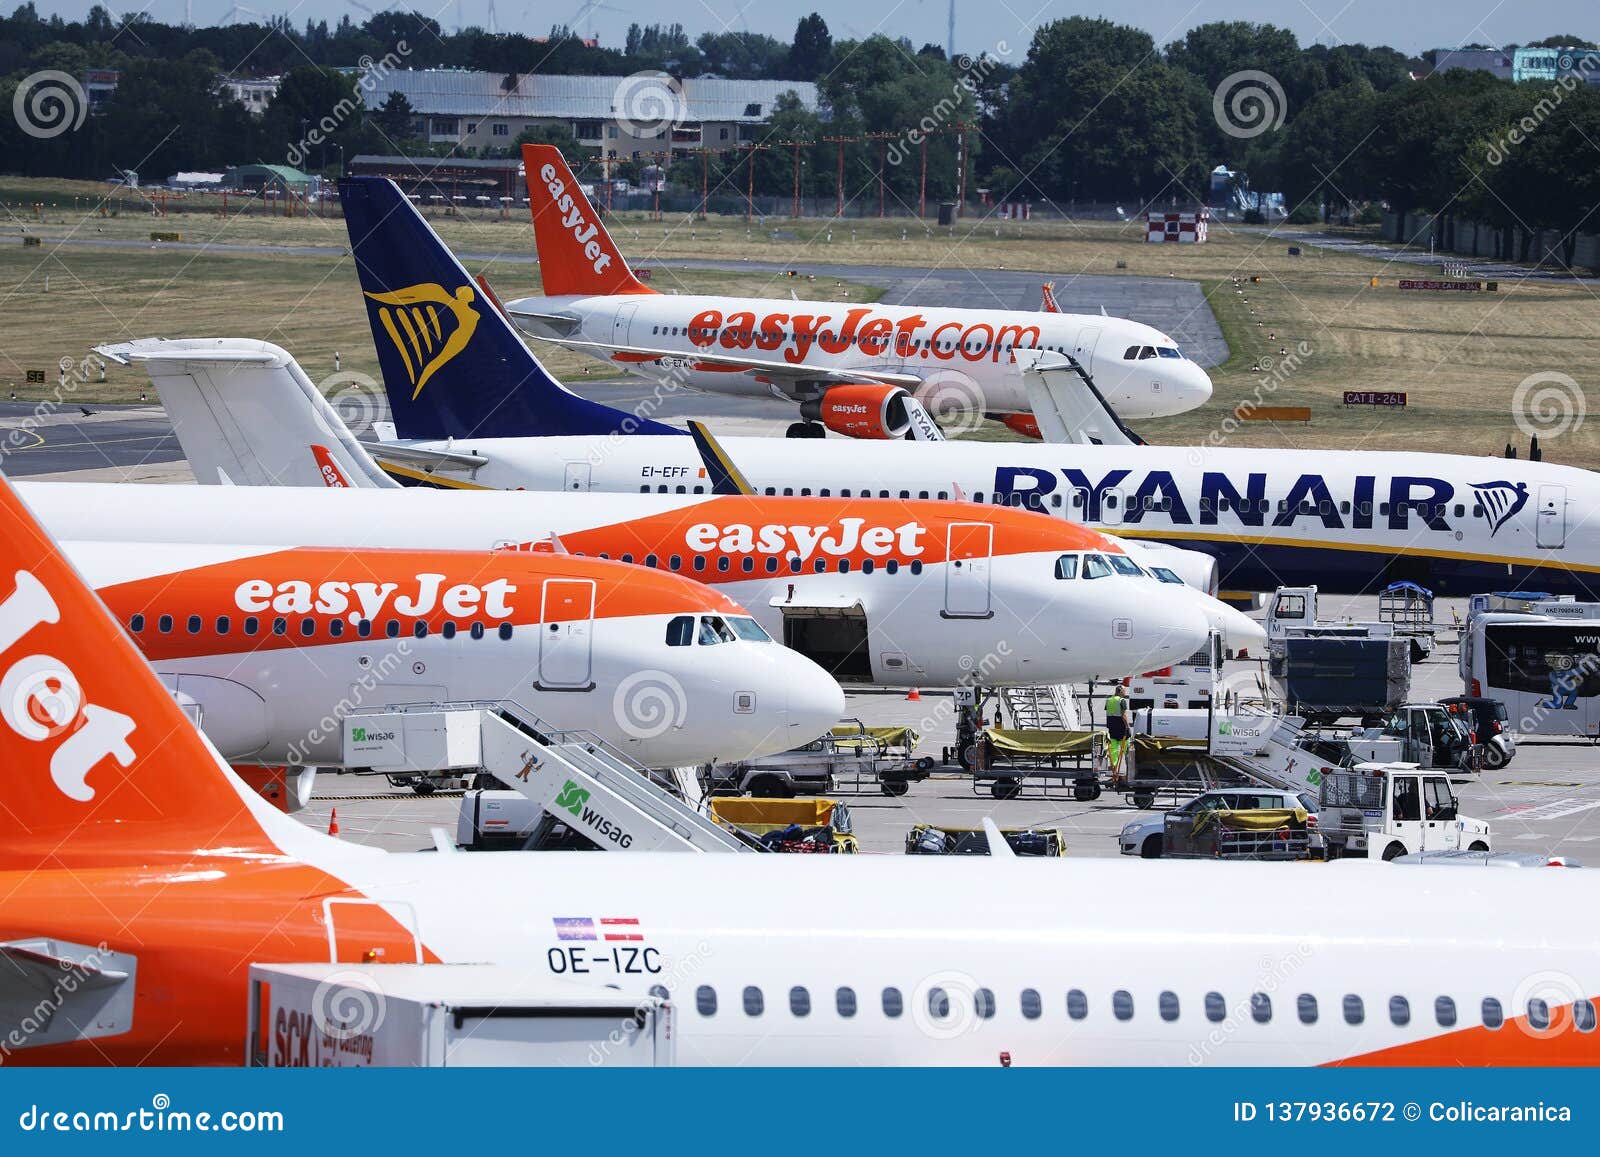 easy jet which terminal